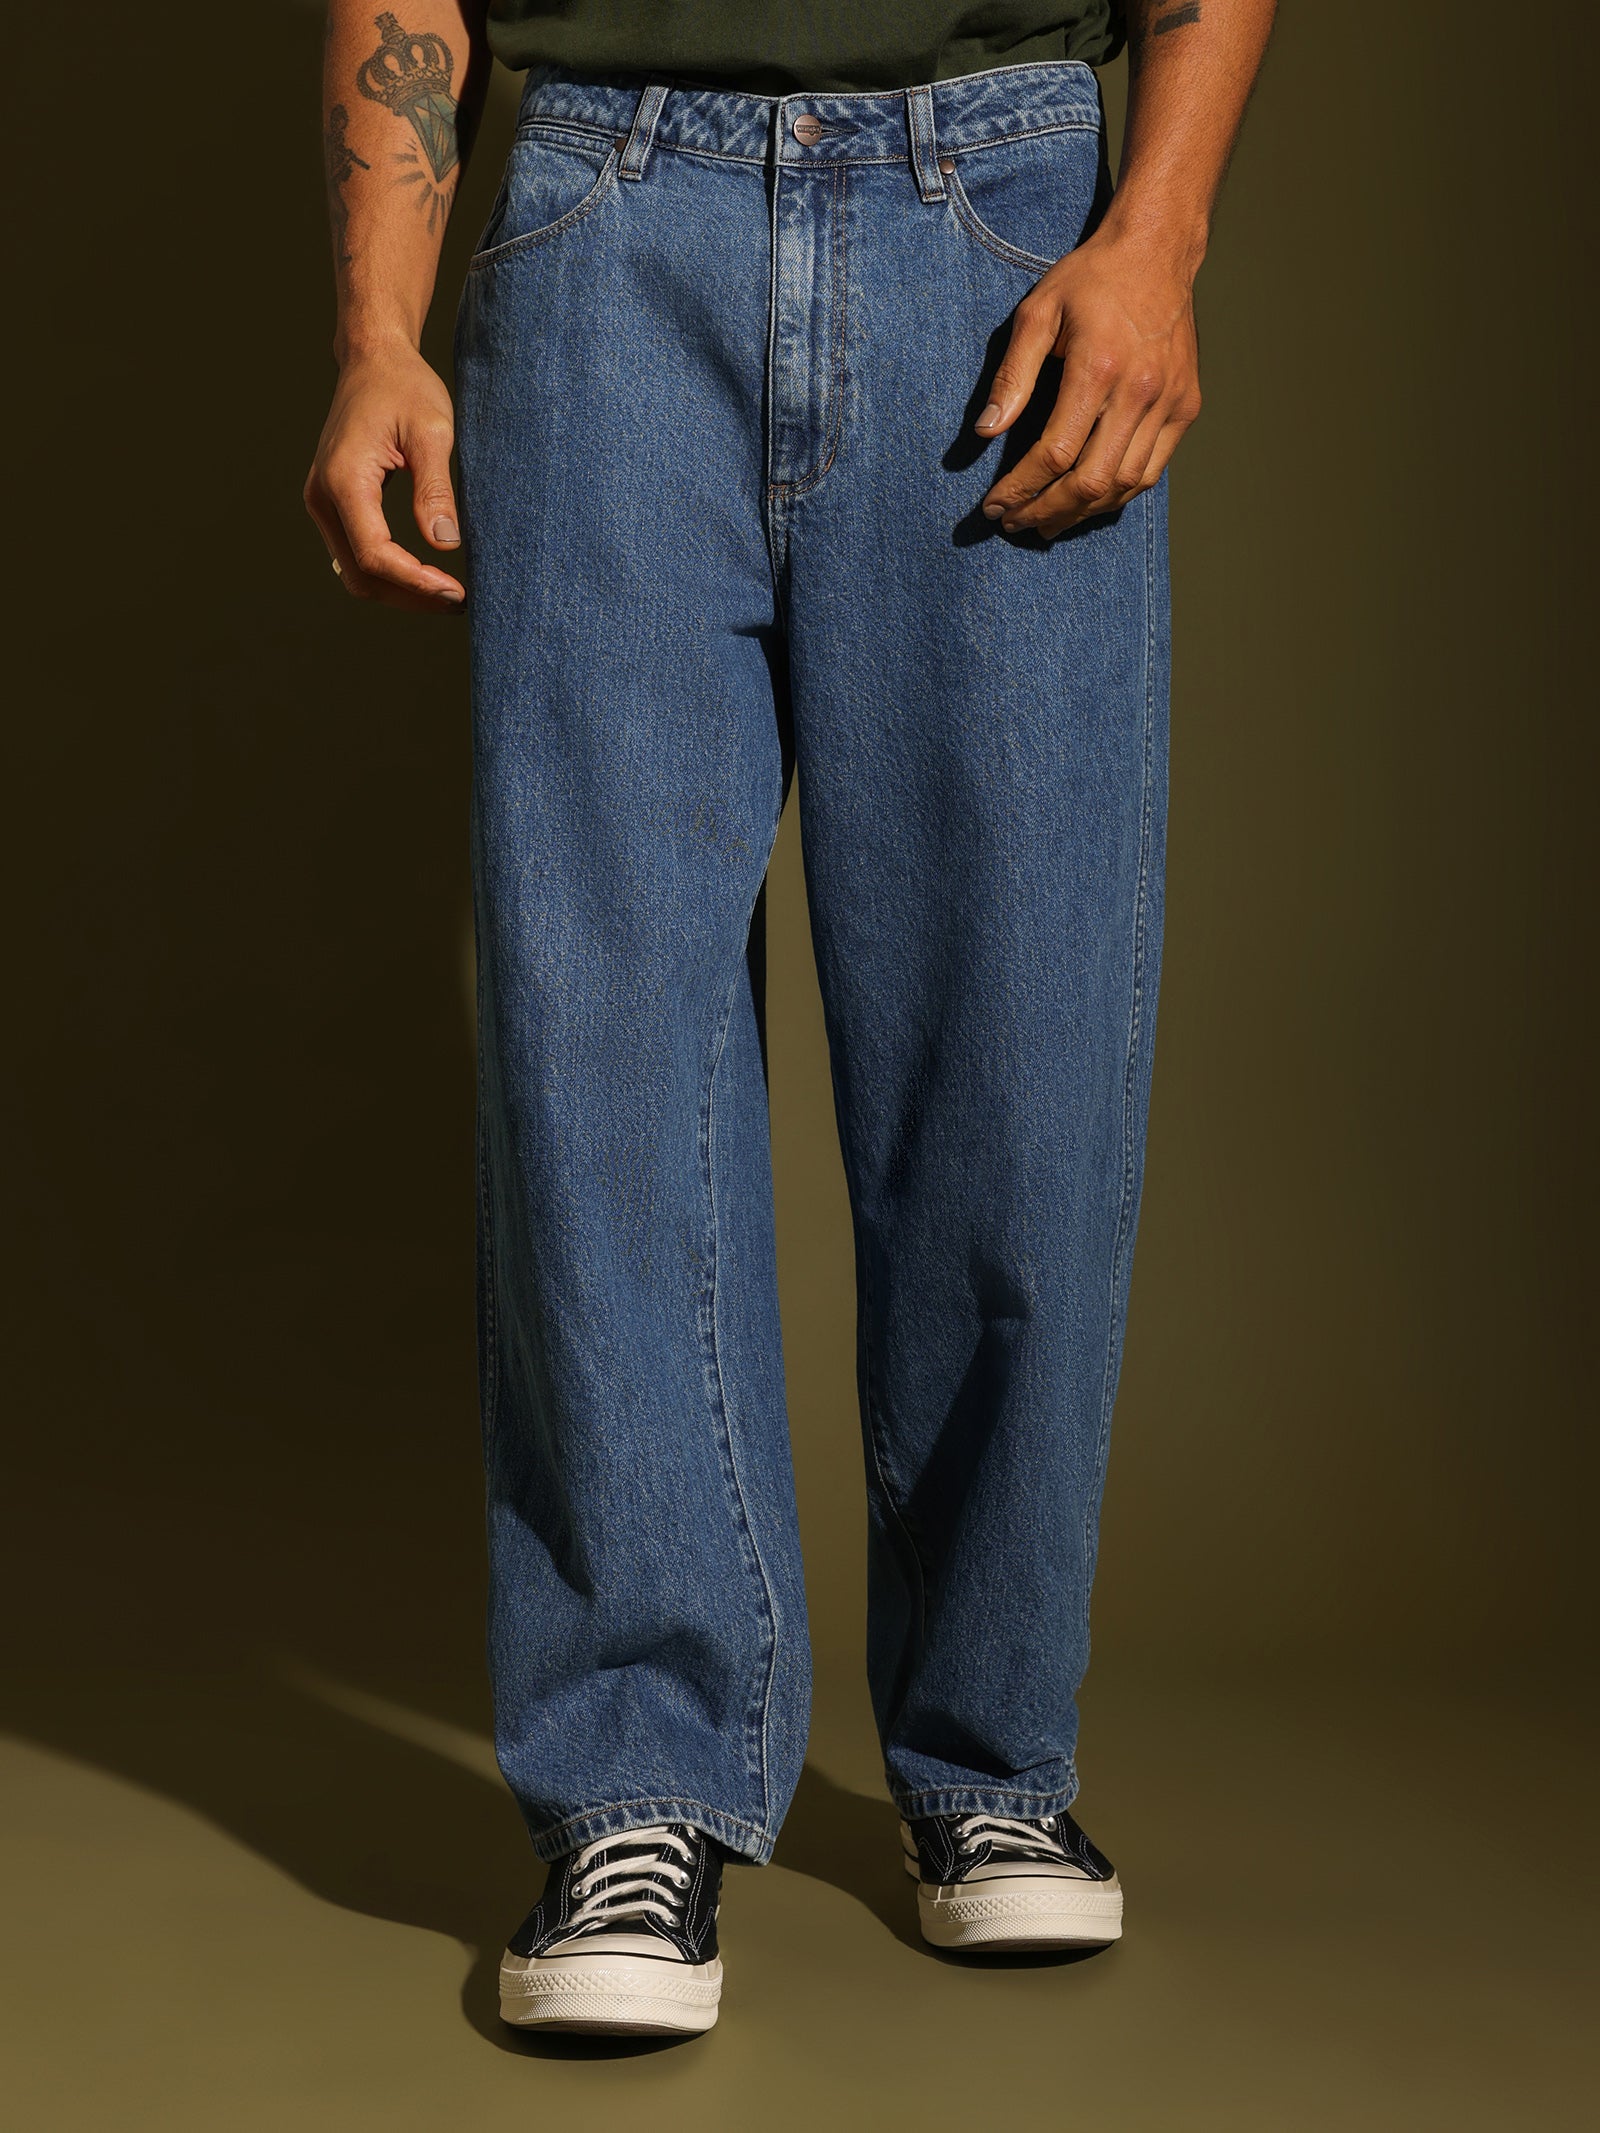 Super Baggy Jeans in Space Lord Mid Blue - Glue Store